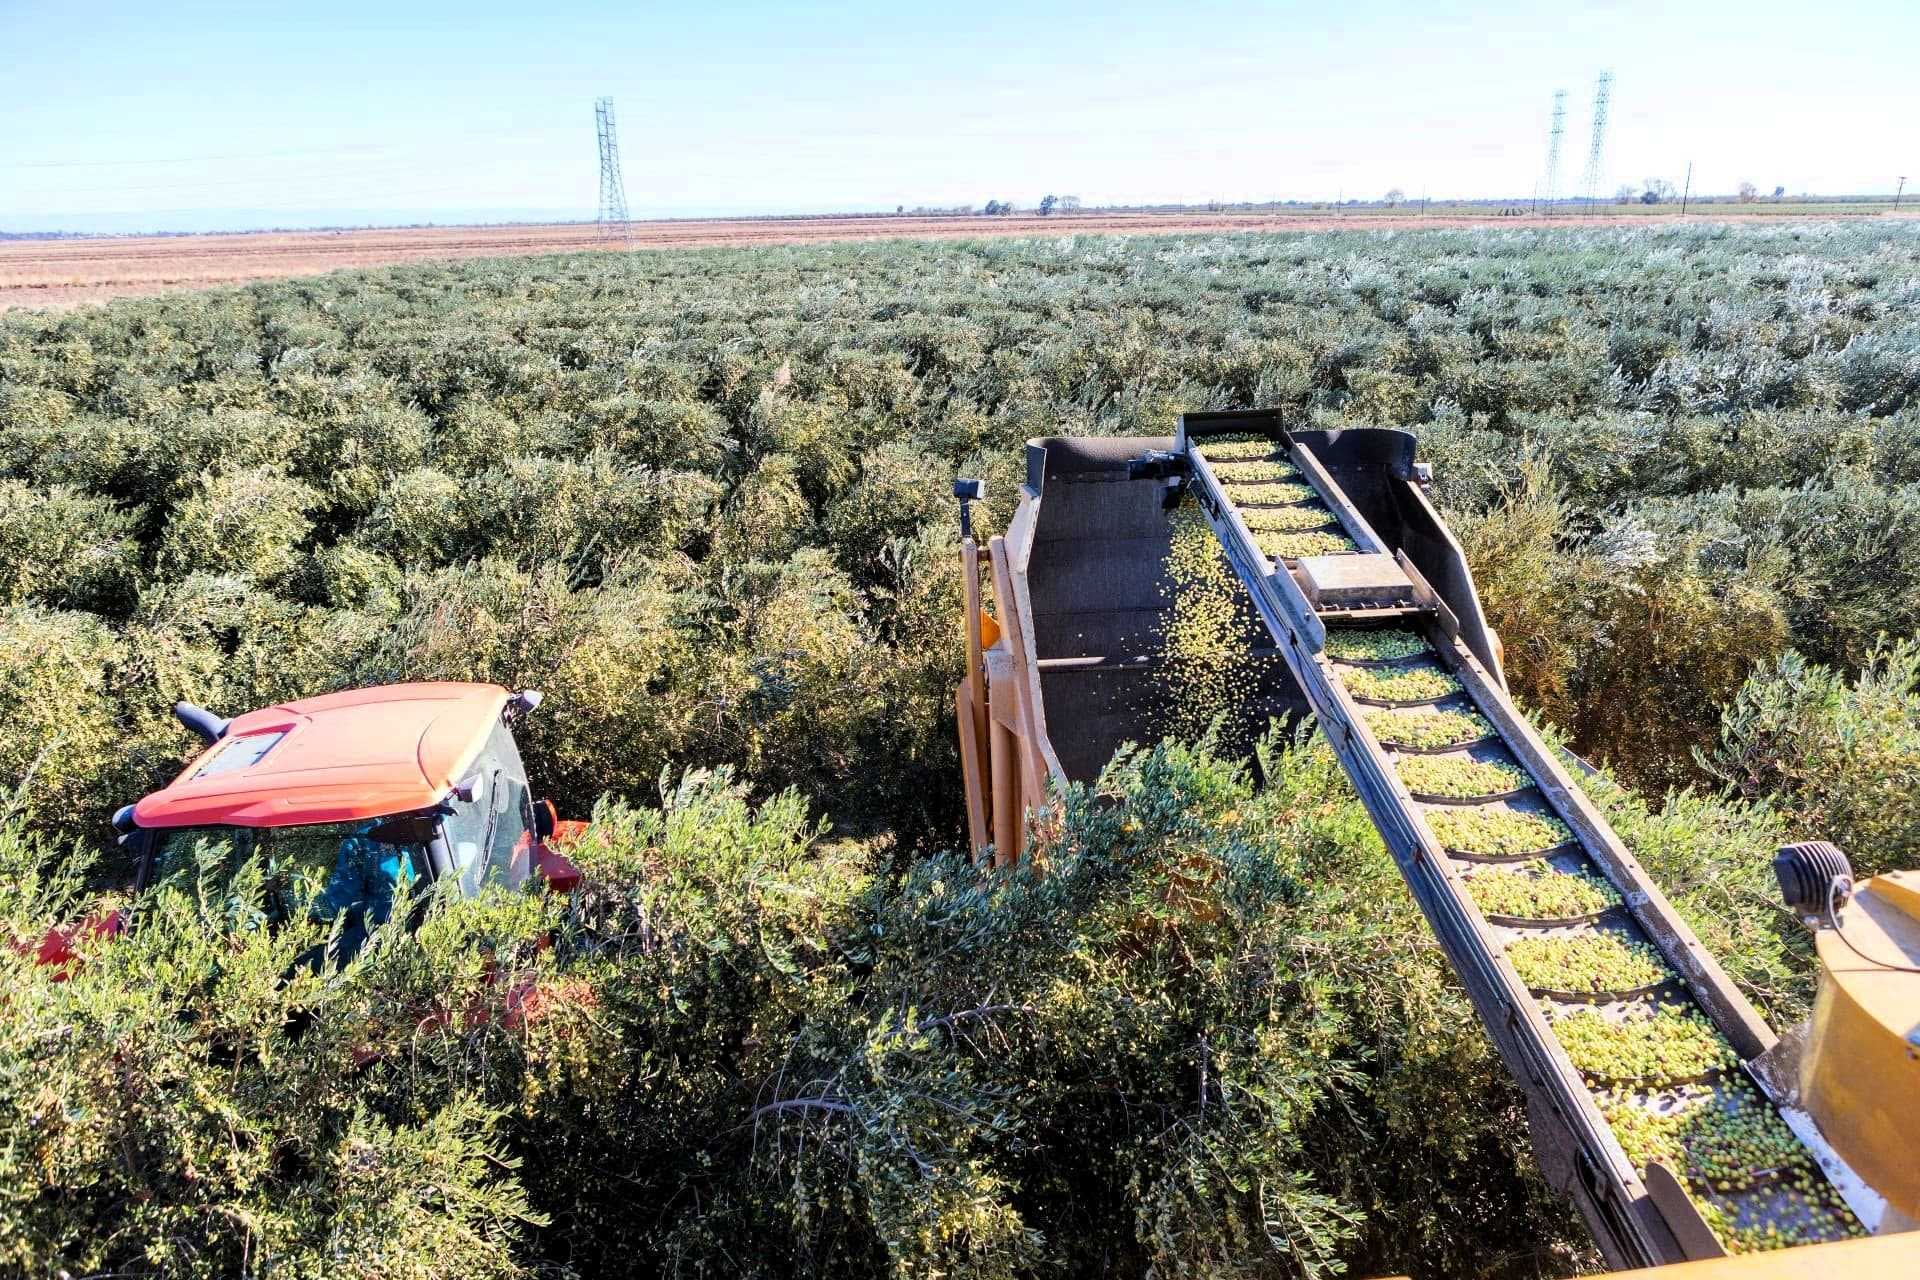 profiles-the-best-olive-oils-production-north-america-family-behind-organic-roots-adapts-as-california-drought-refuses-to-break-olive-oil-times